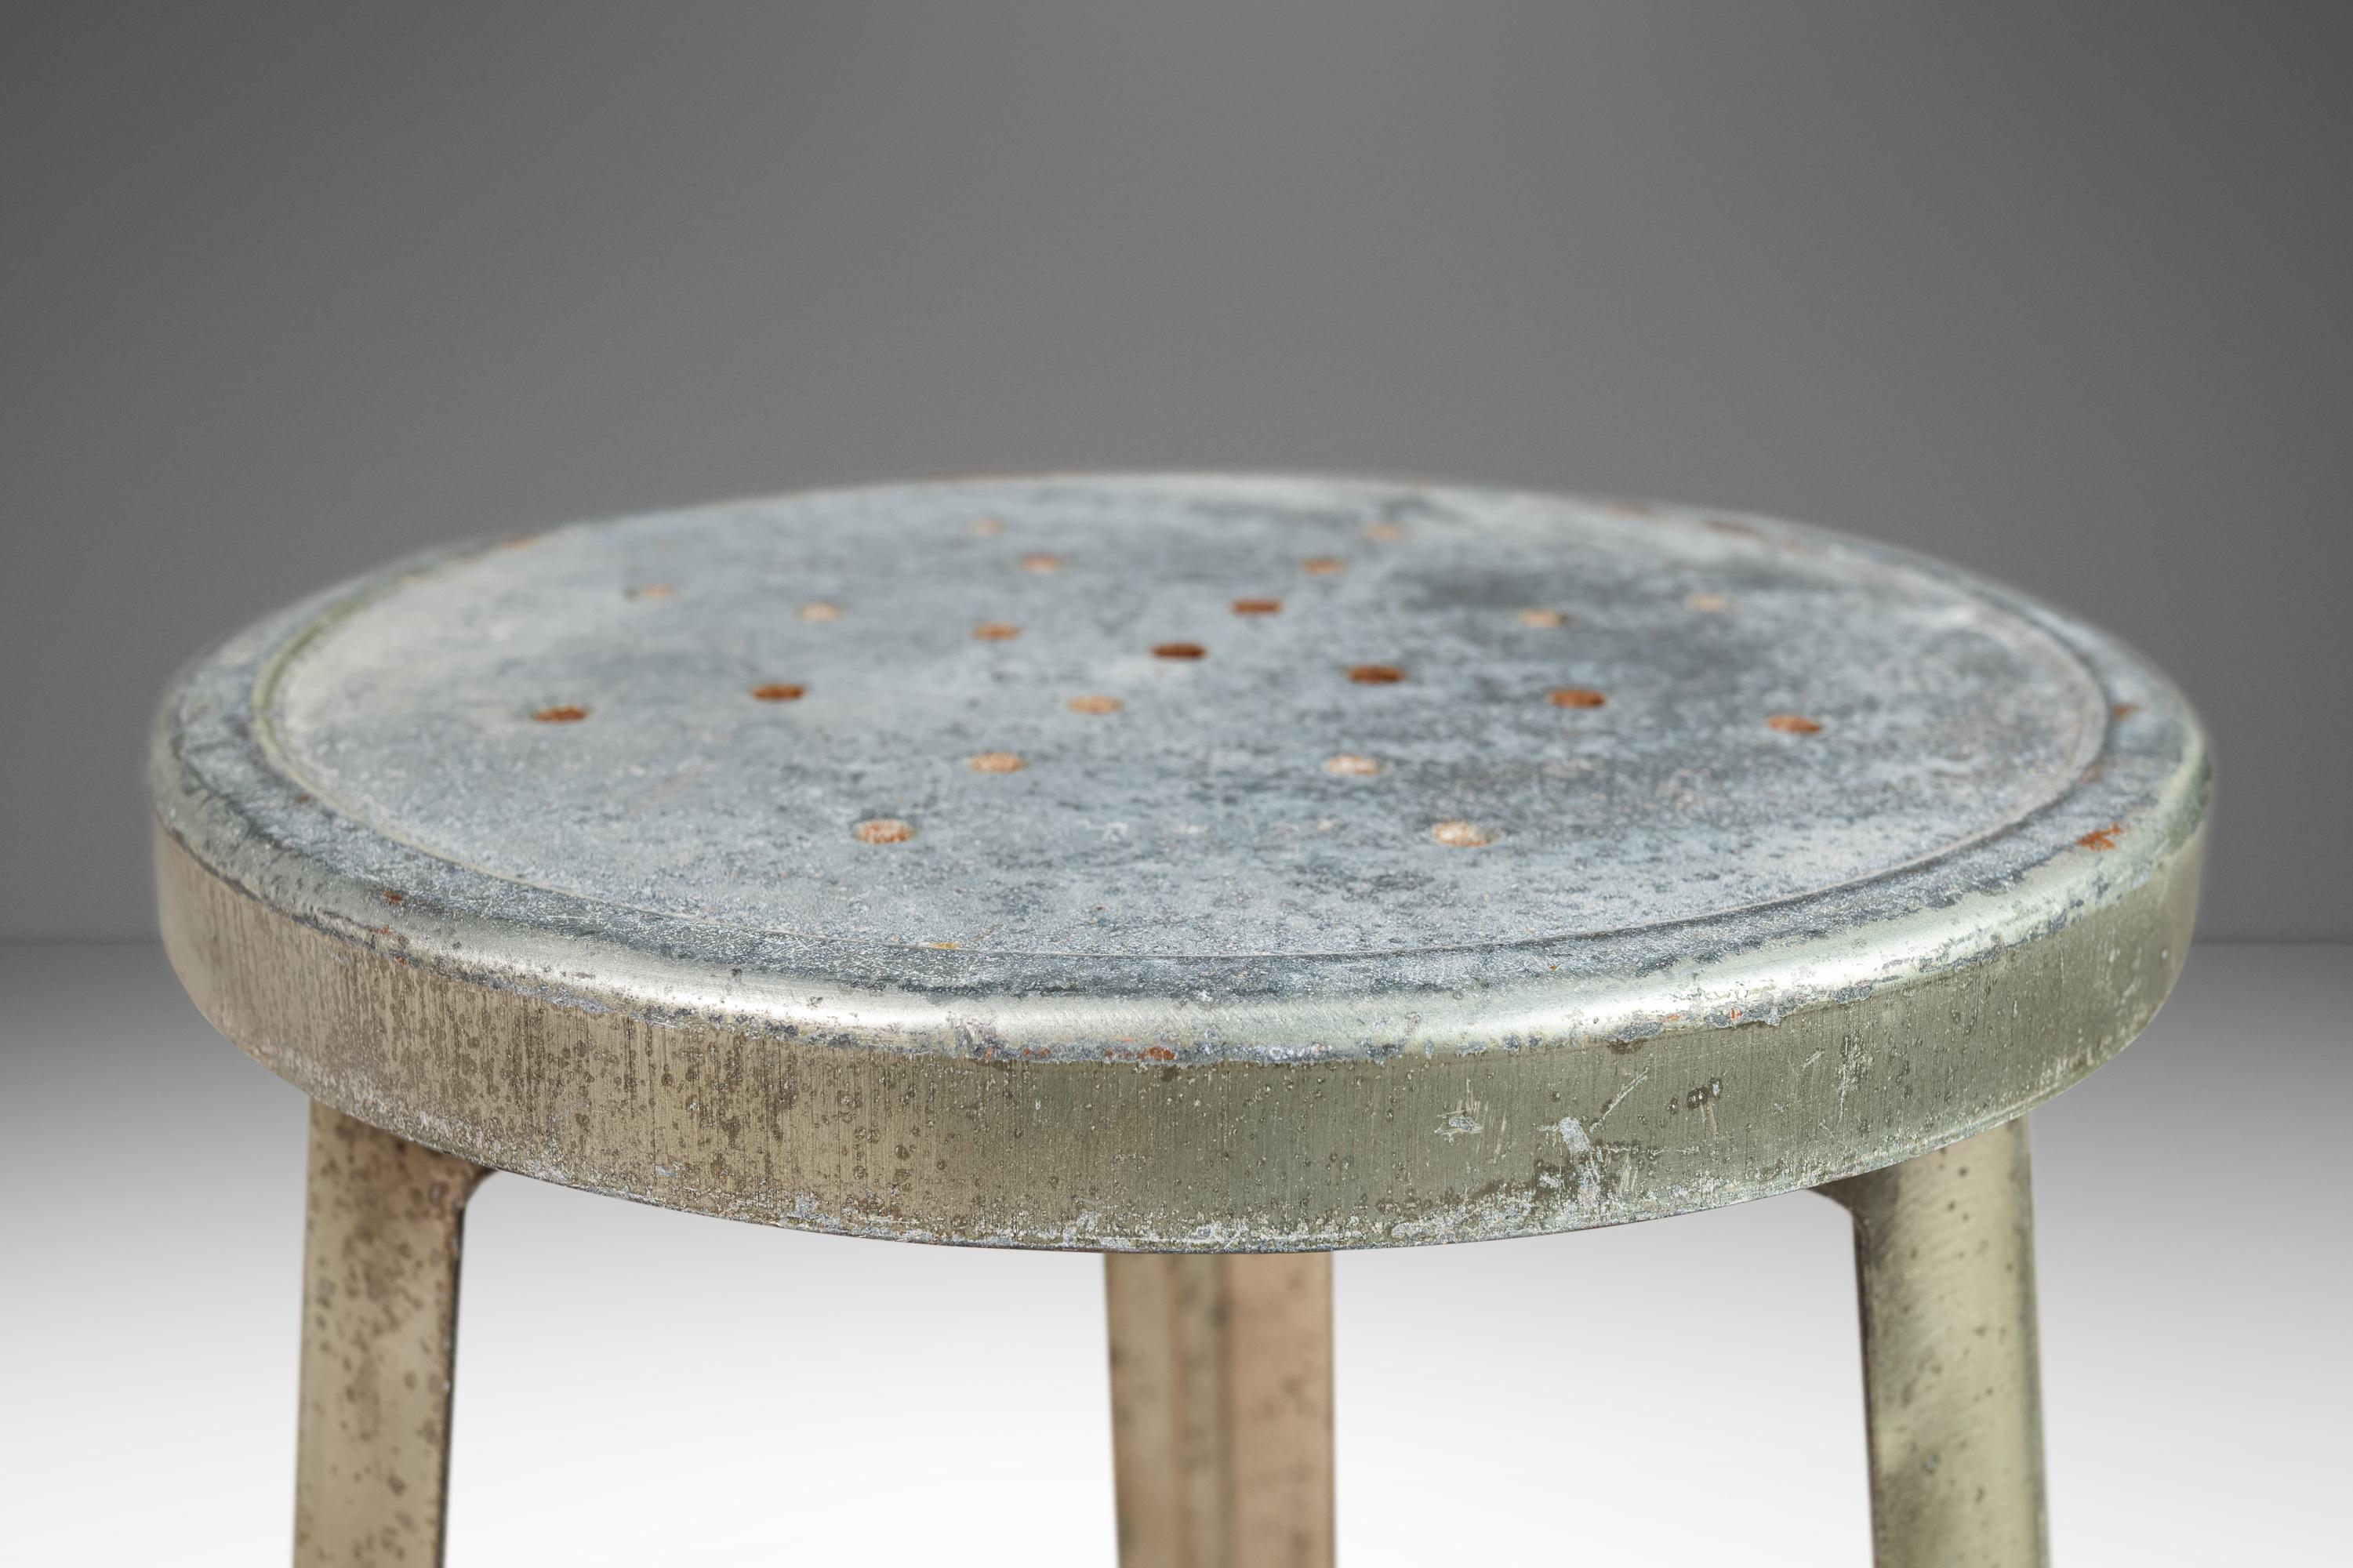 Set of Four '4' Hammered Industrial Counter Height Bar Stools, France, C. 1950s For Sale 2